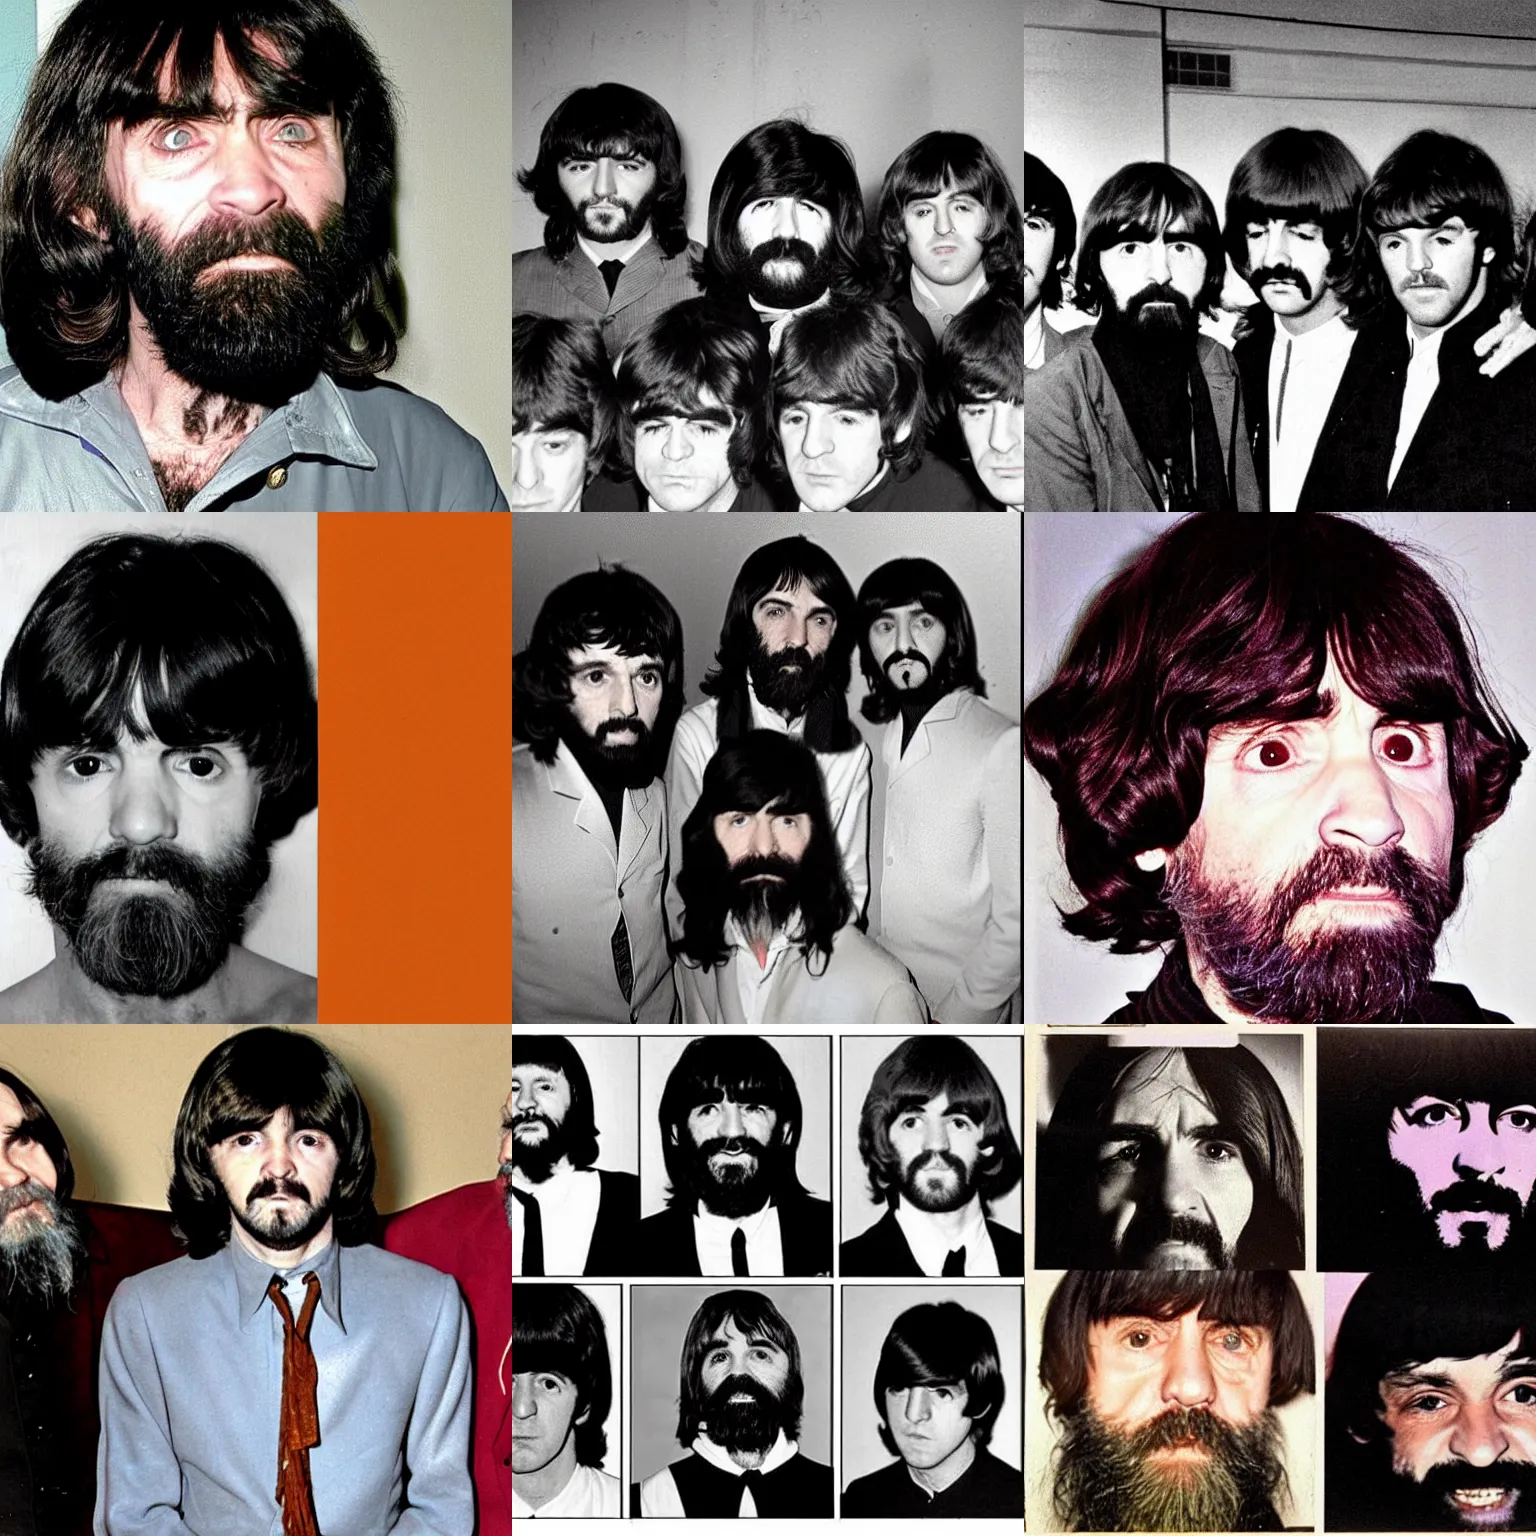 Prompt: Charles Manson as the fifth member of The Beatles.